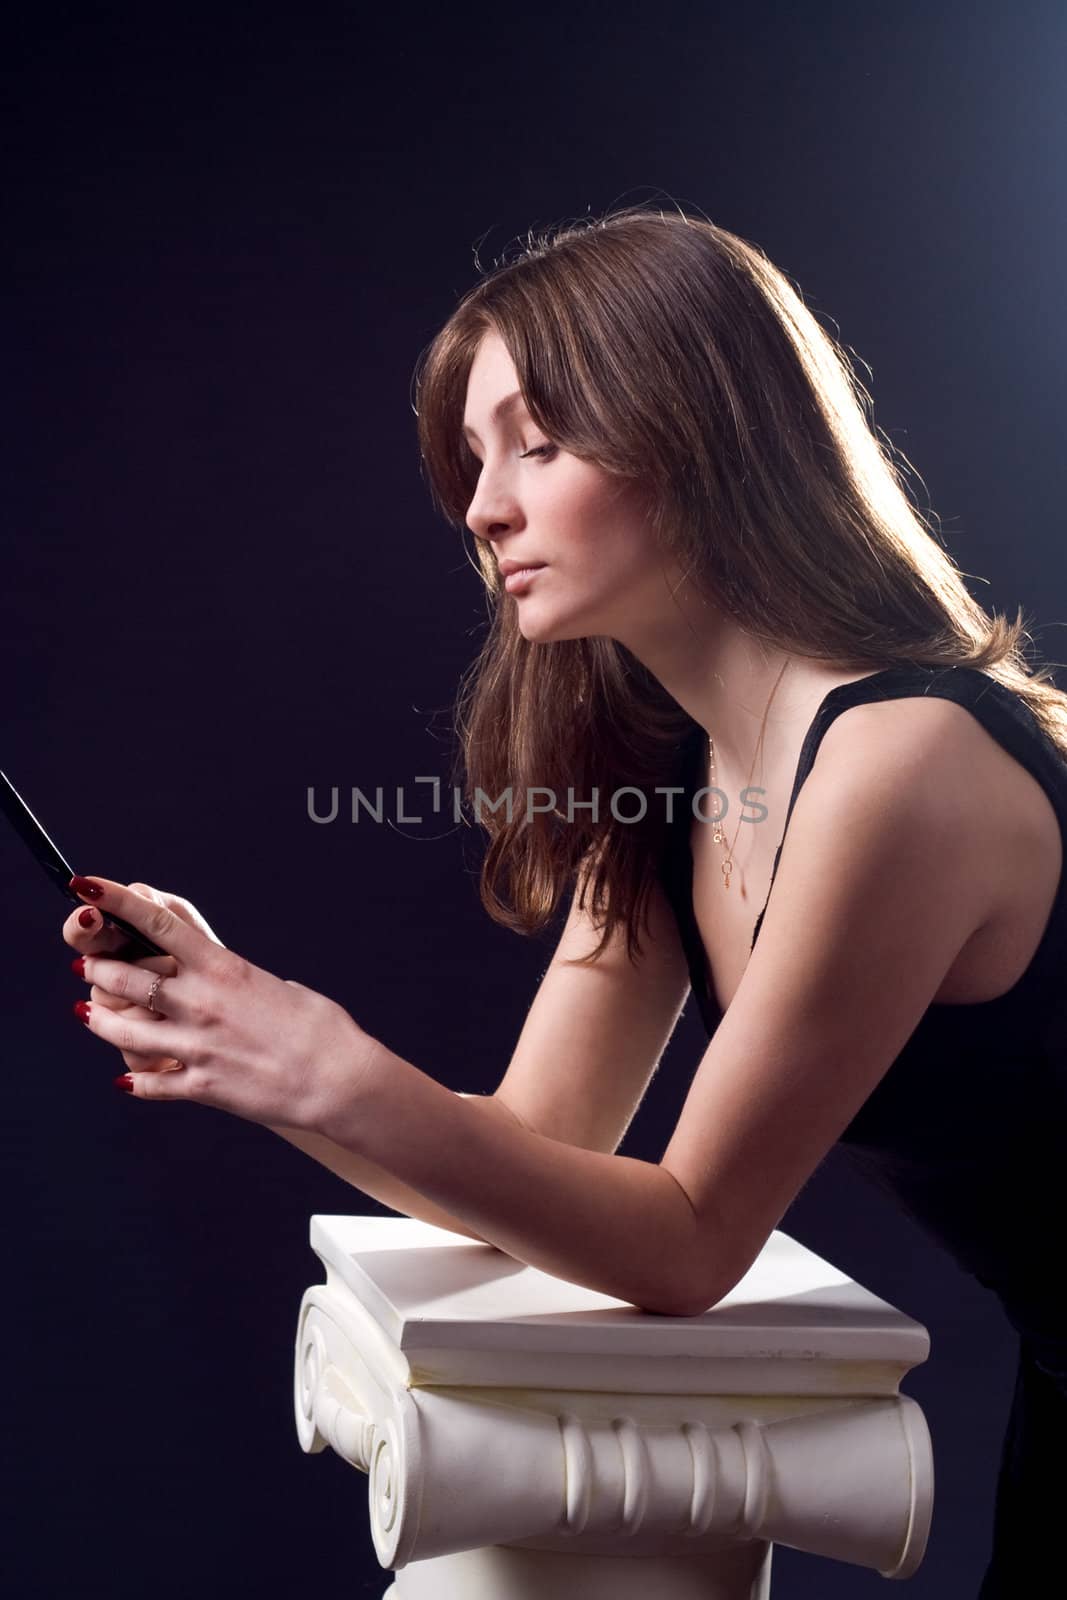 lady with mobile phone by foaloce